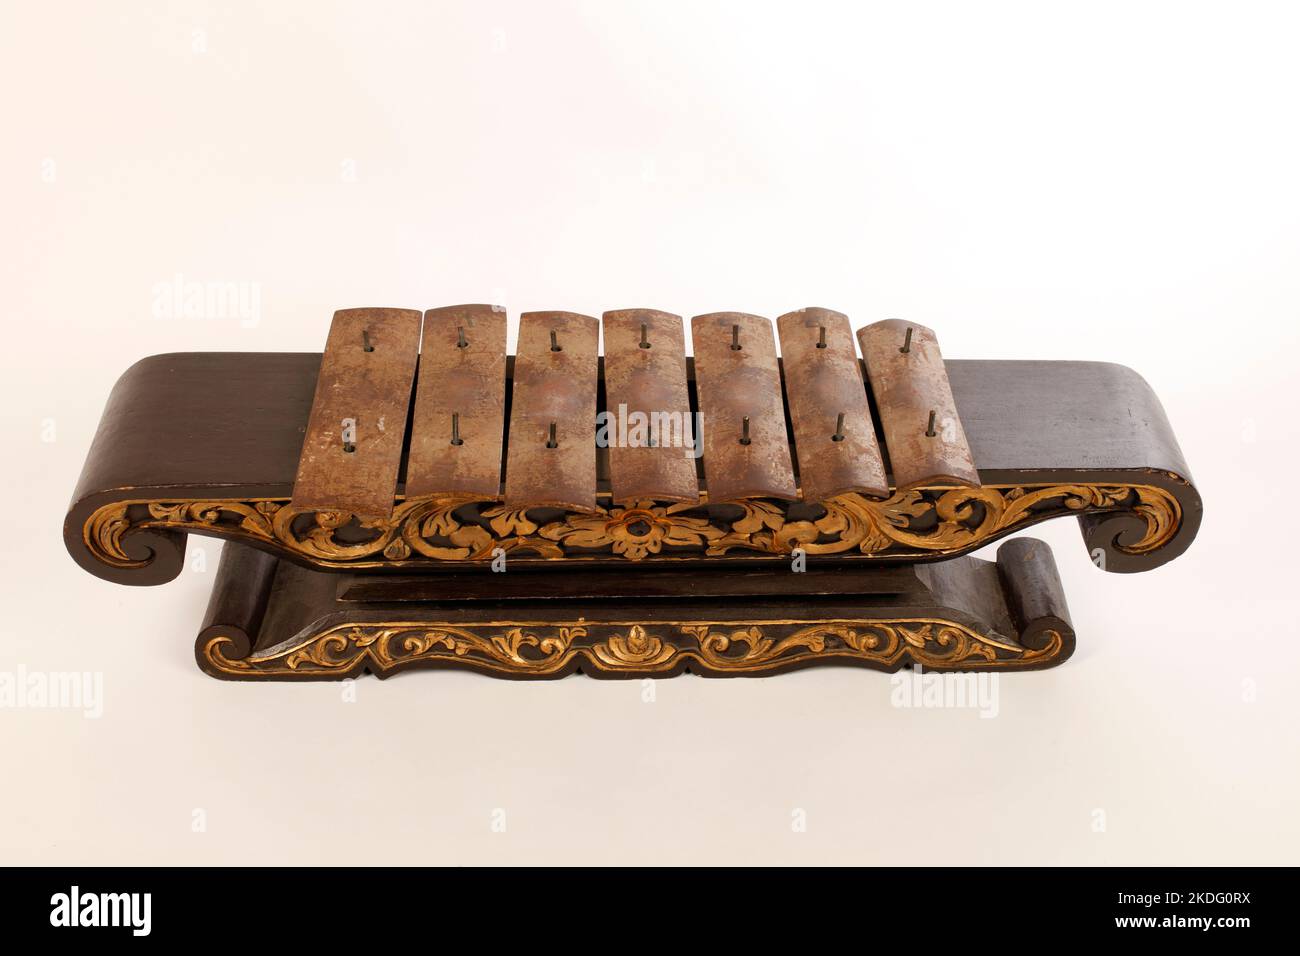 Saron Demung. From Java. 7 note metal xylophone from a Gamelan. Stock Photo